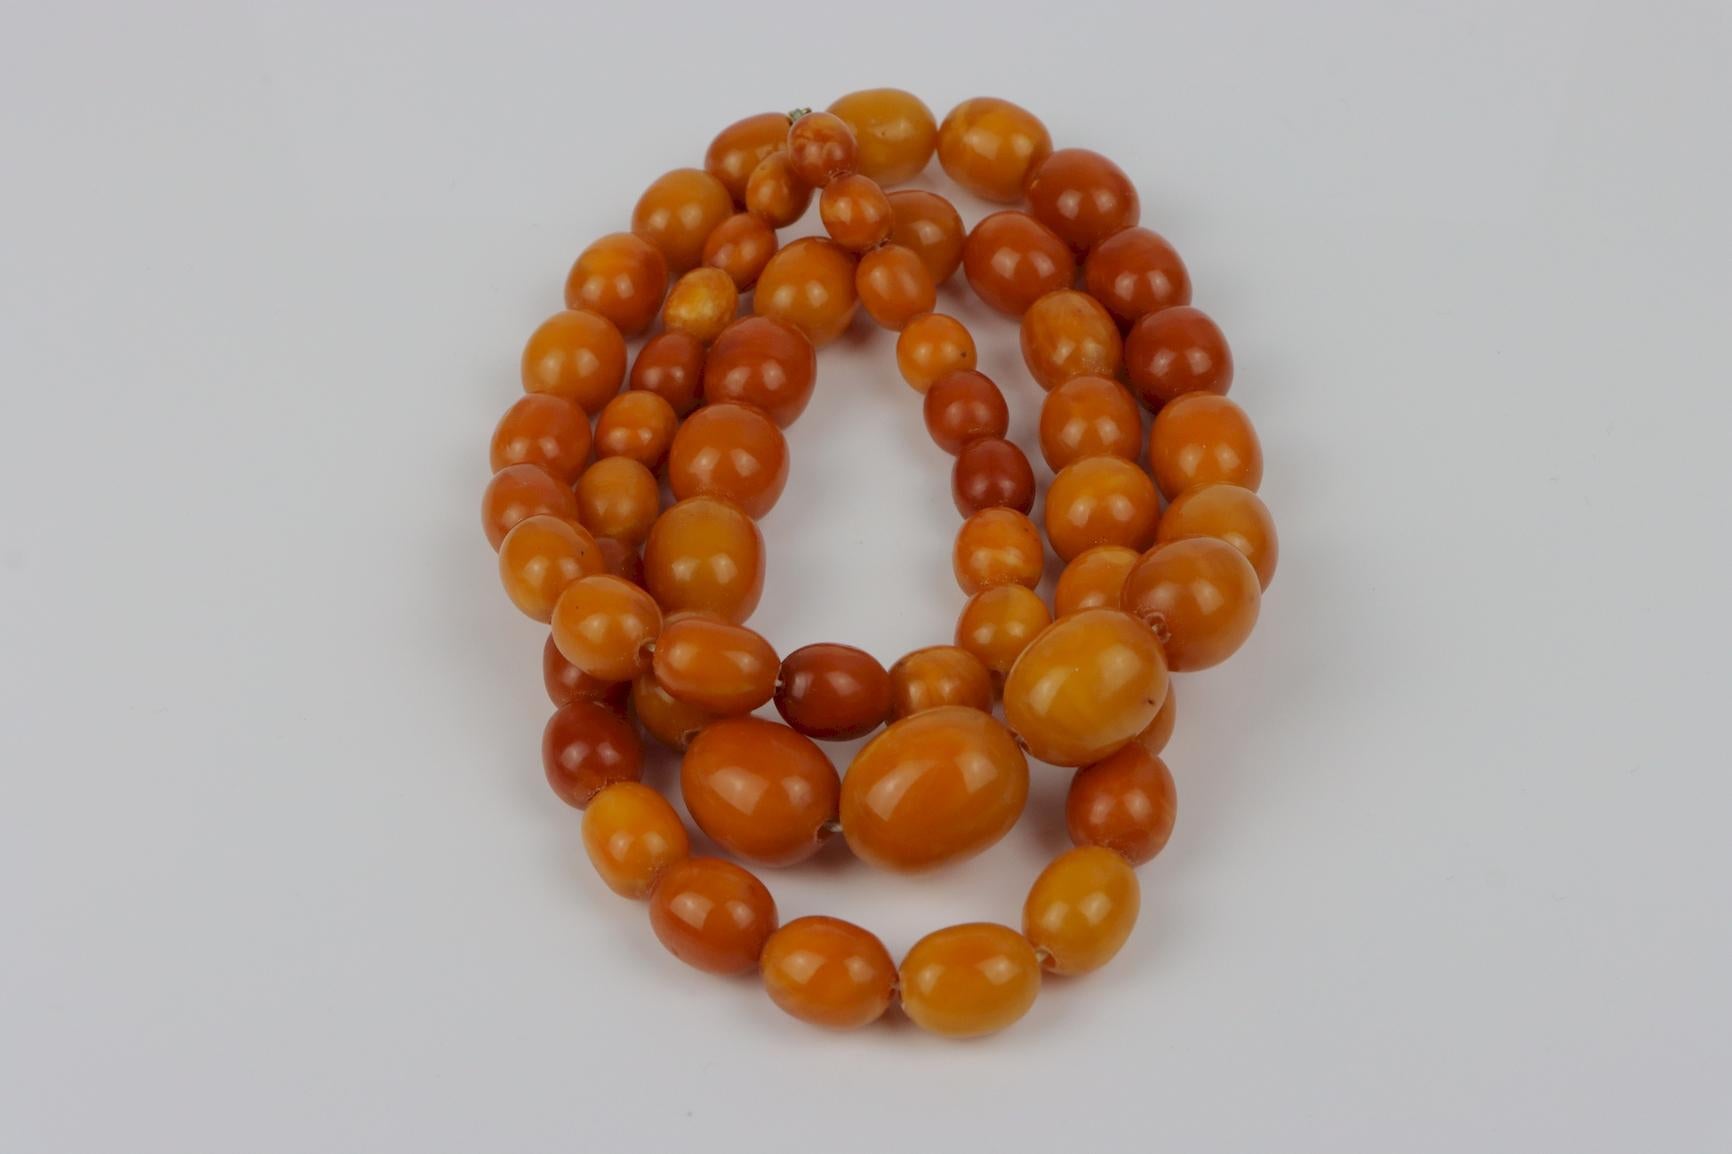 Antique 14K Gold Beeswax Amber Bead Necklace For Sale 2